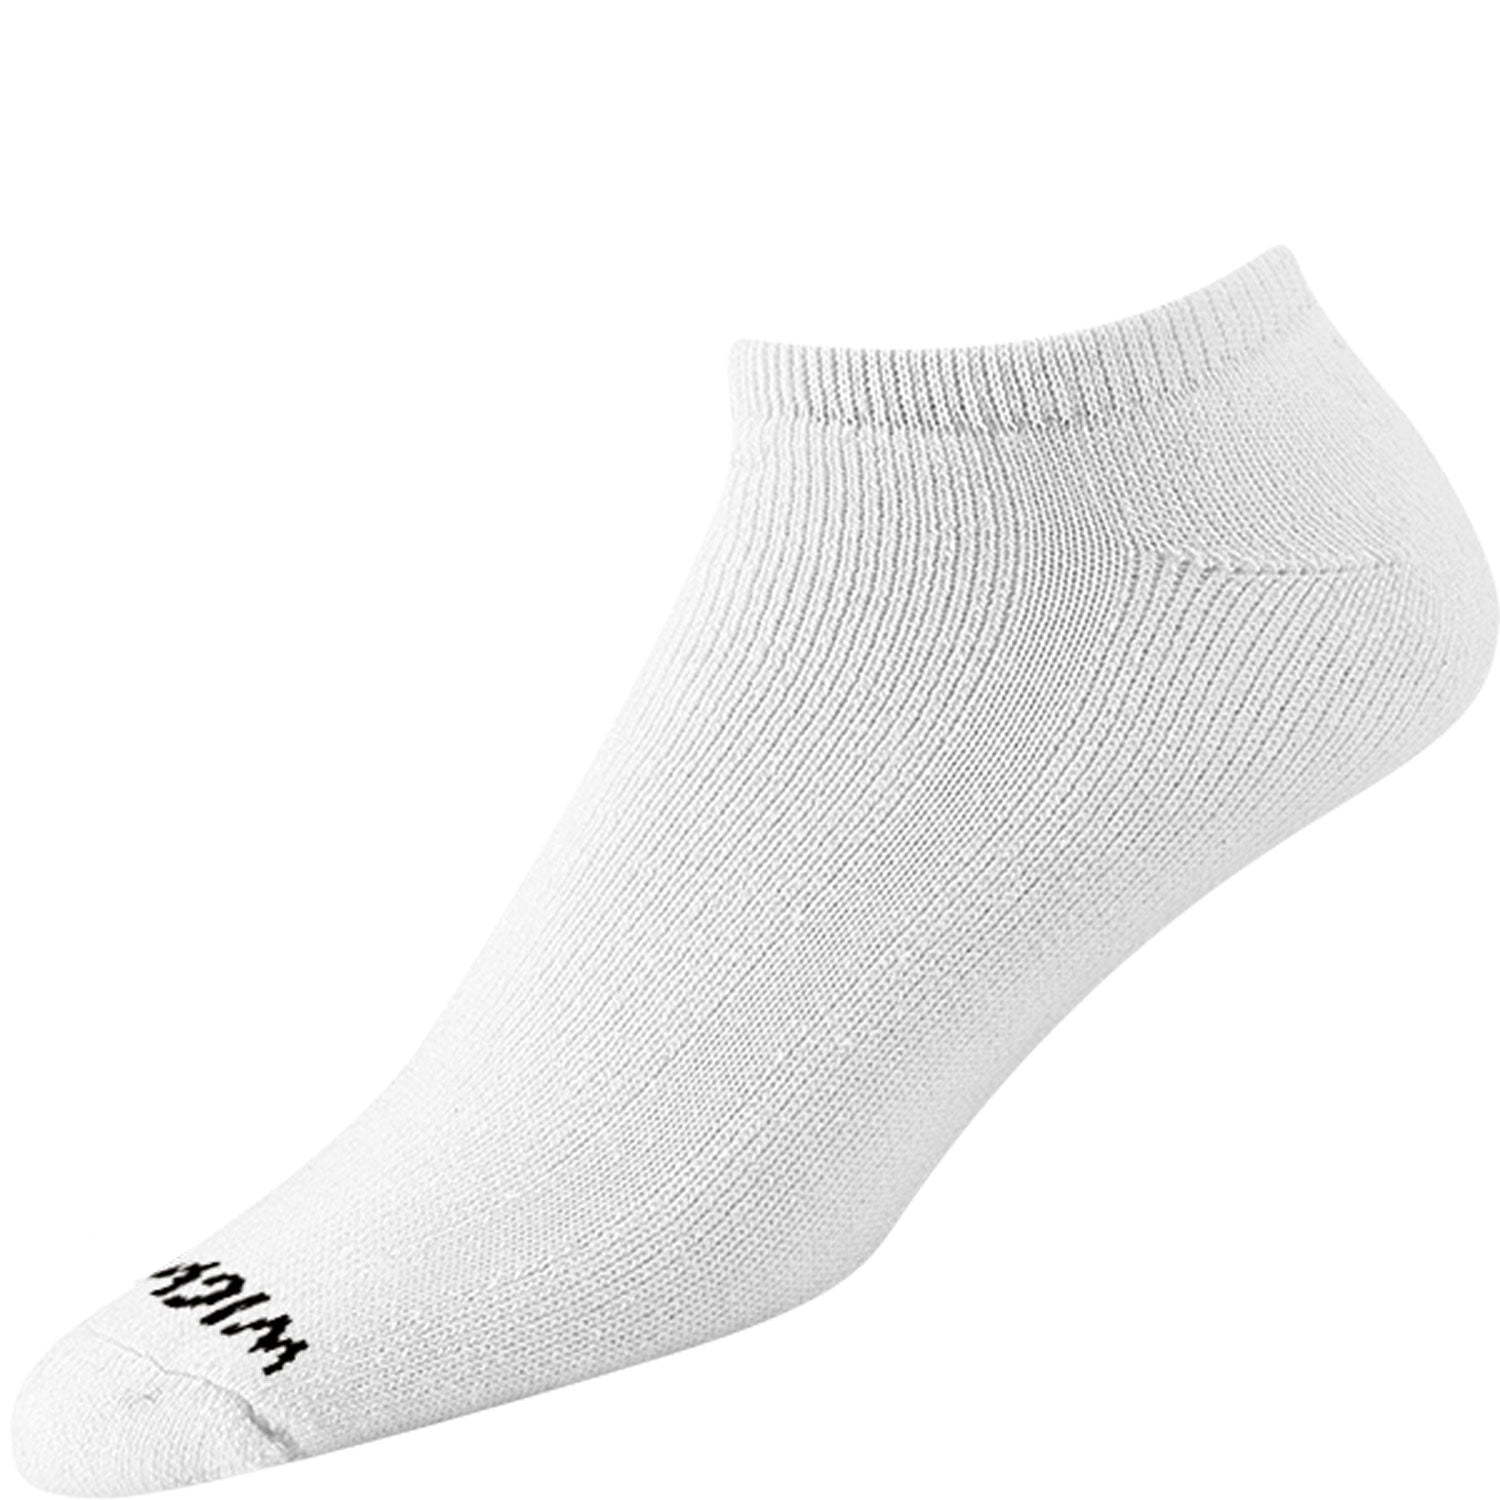 Super 60® Low-Cut 3-Pack Midweight Cotton Socks - White full product perspective - made in The USA Wigwam Socks